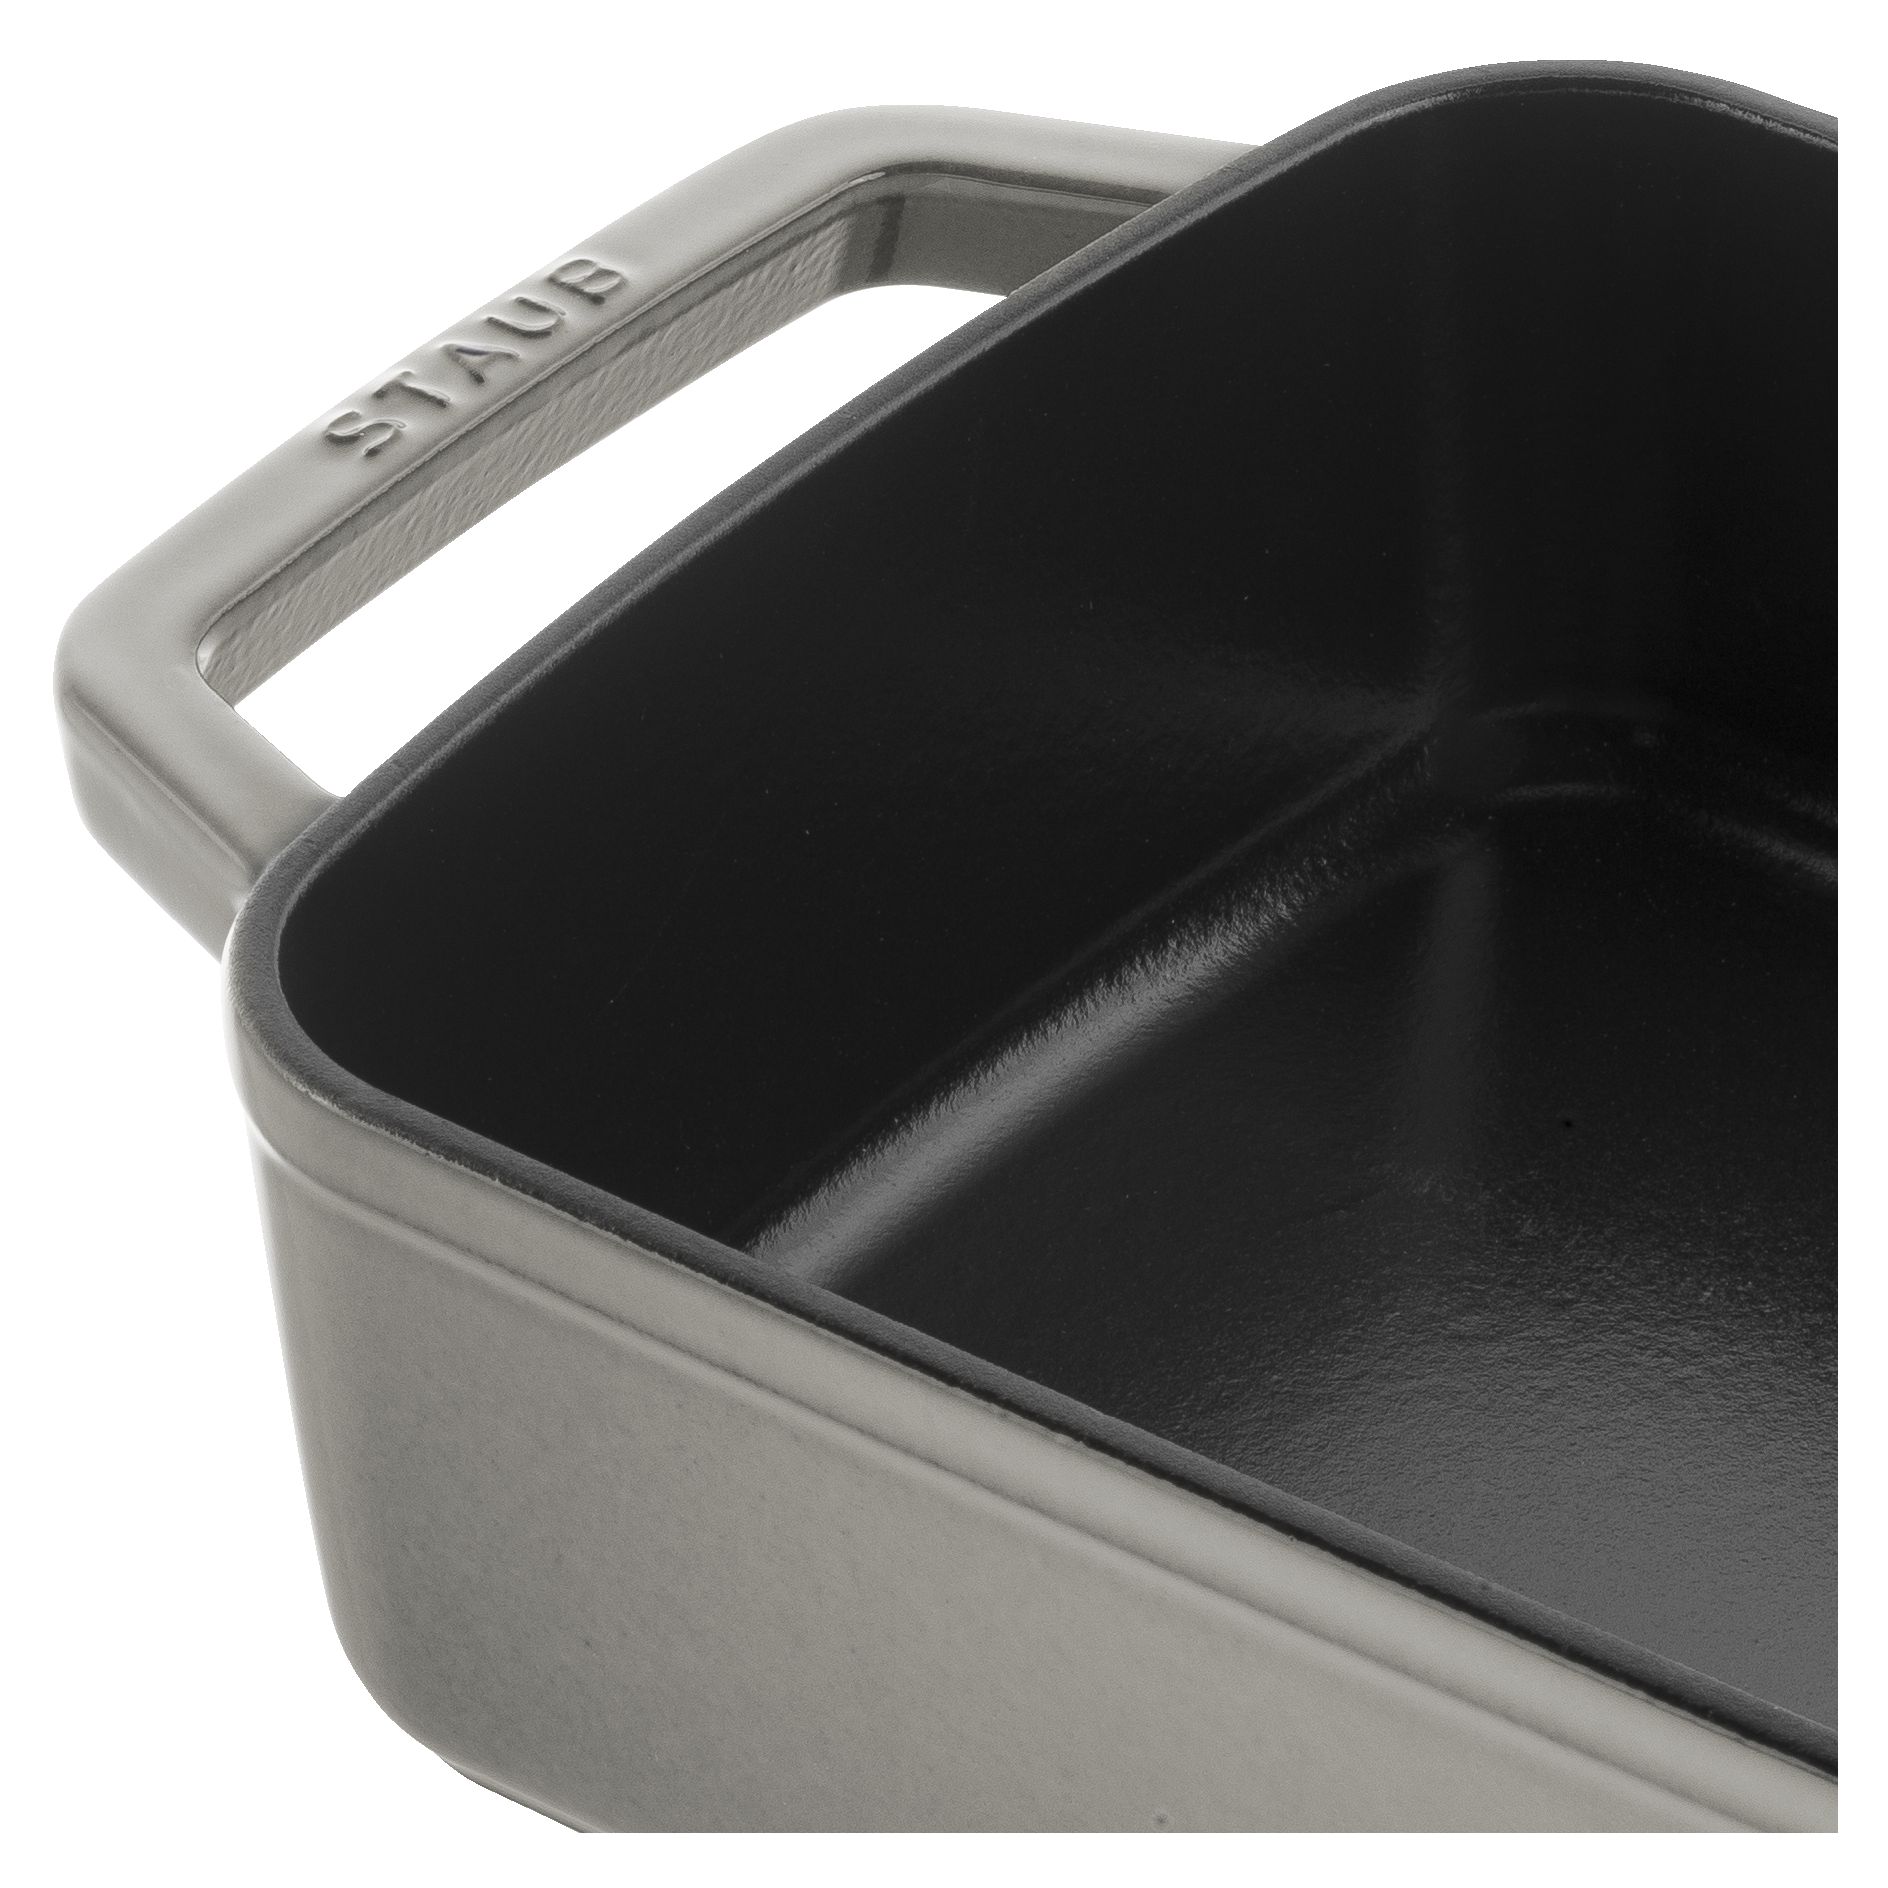 Buy Staub Cast Iron - Baking Dishes & Roasters Oven dish